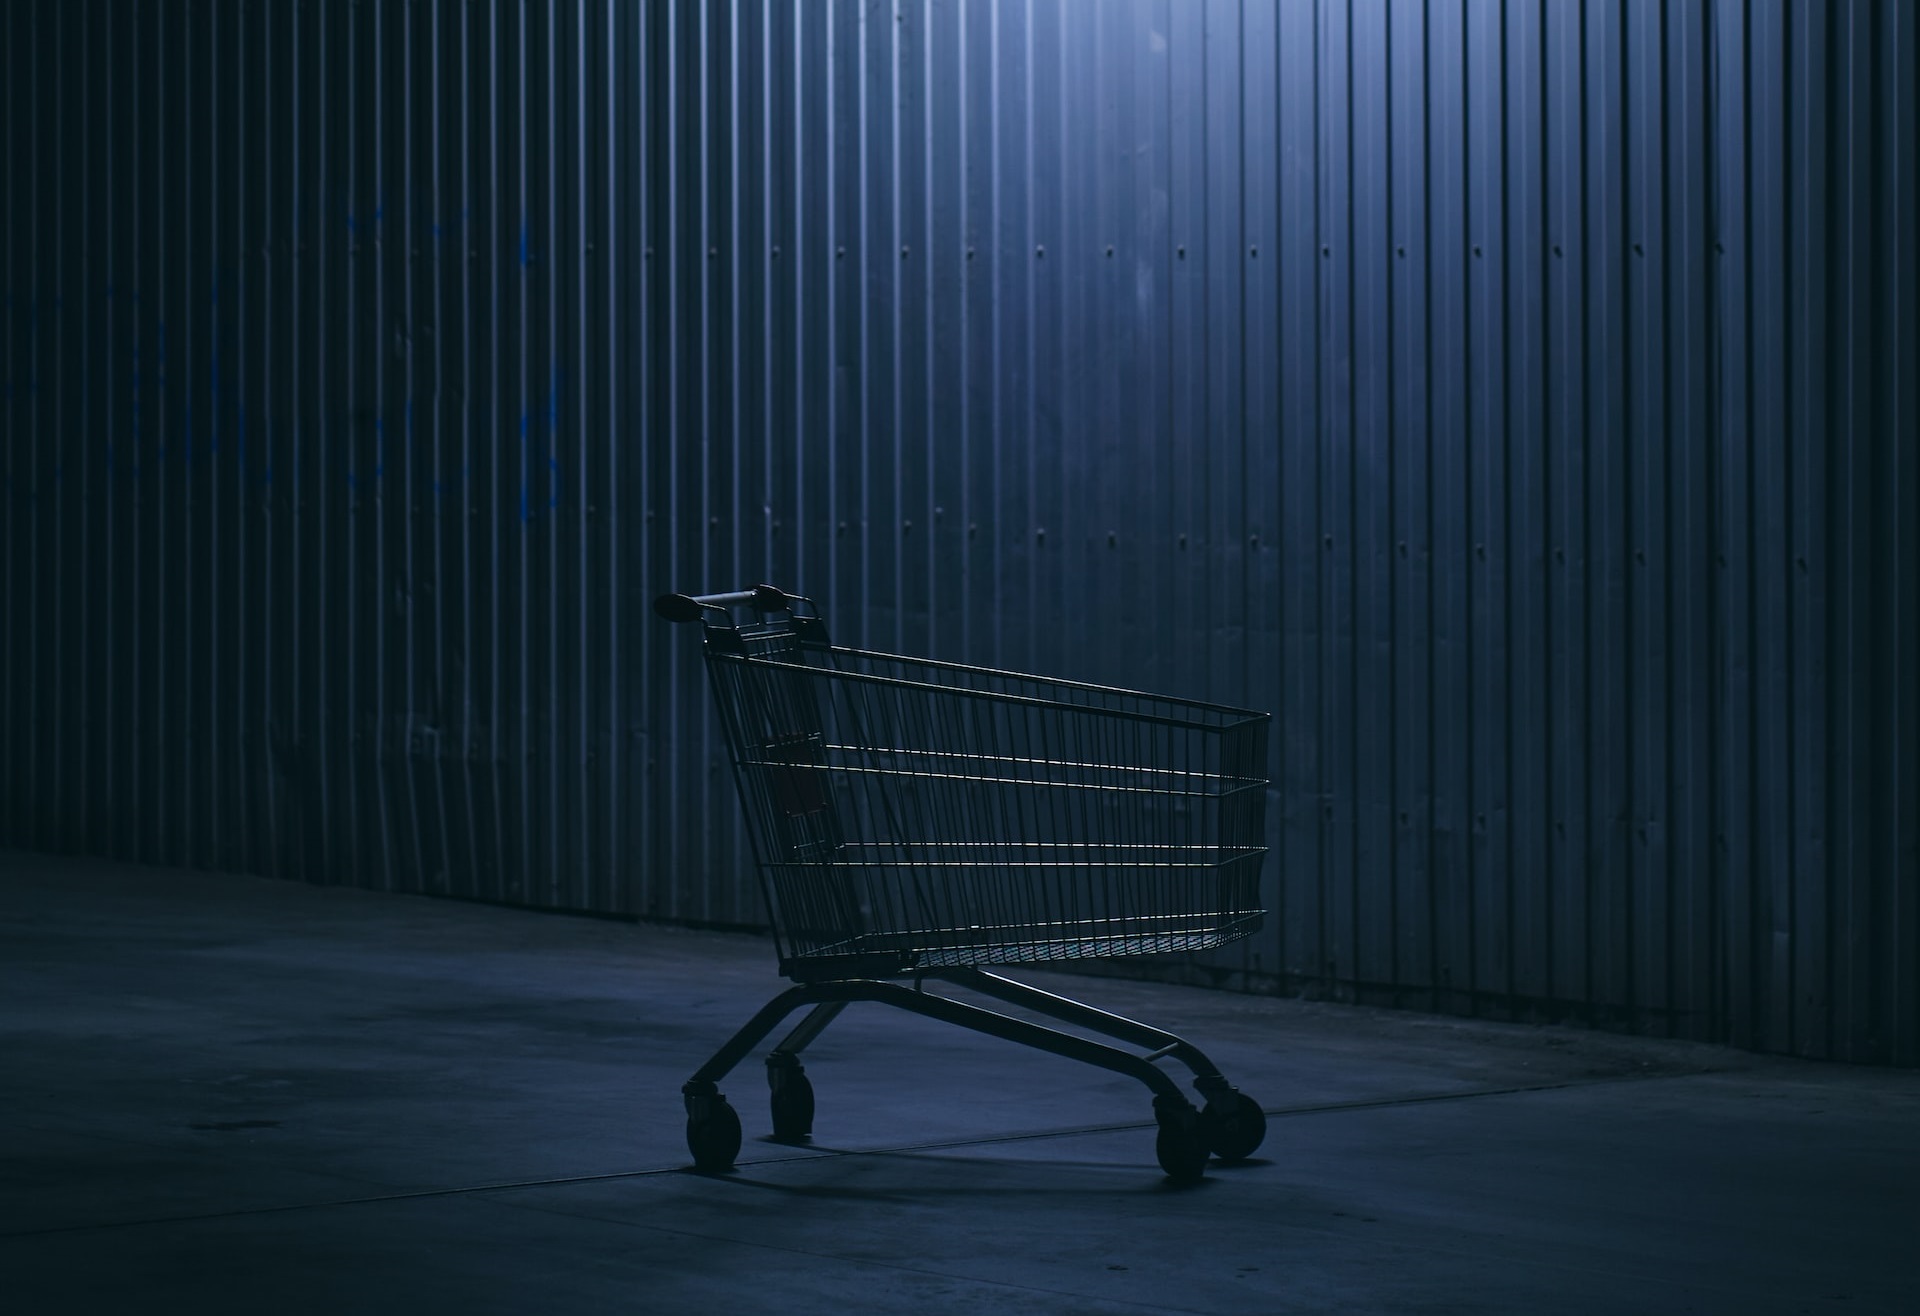 An abandoned shopping cart in a poorly lit area.